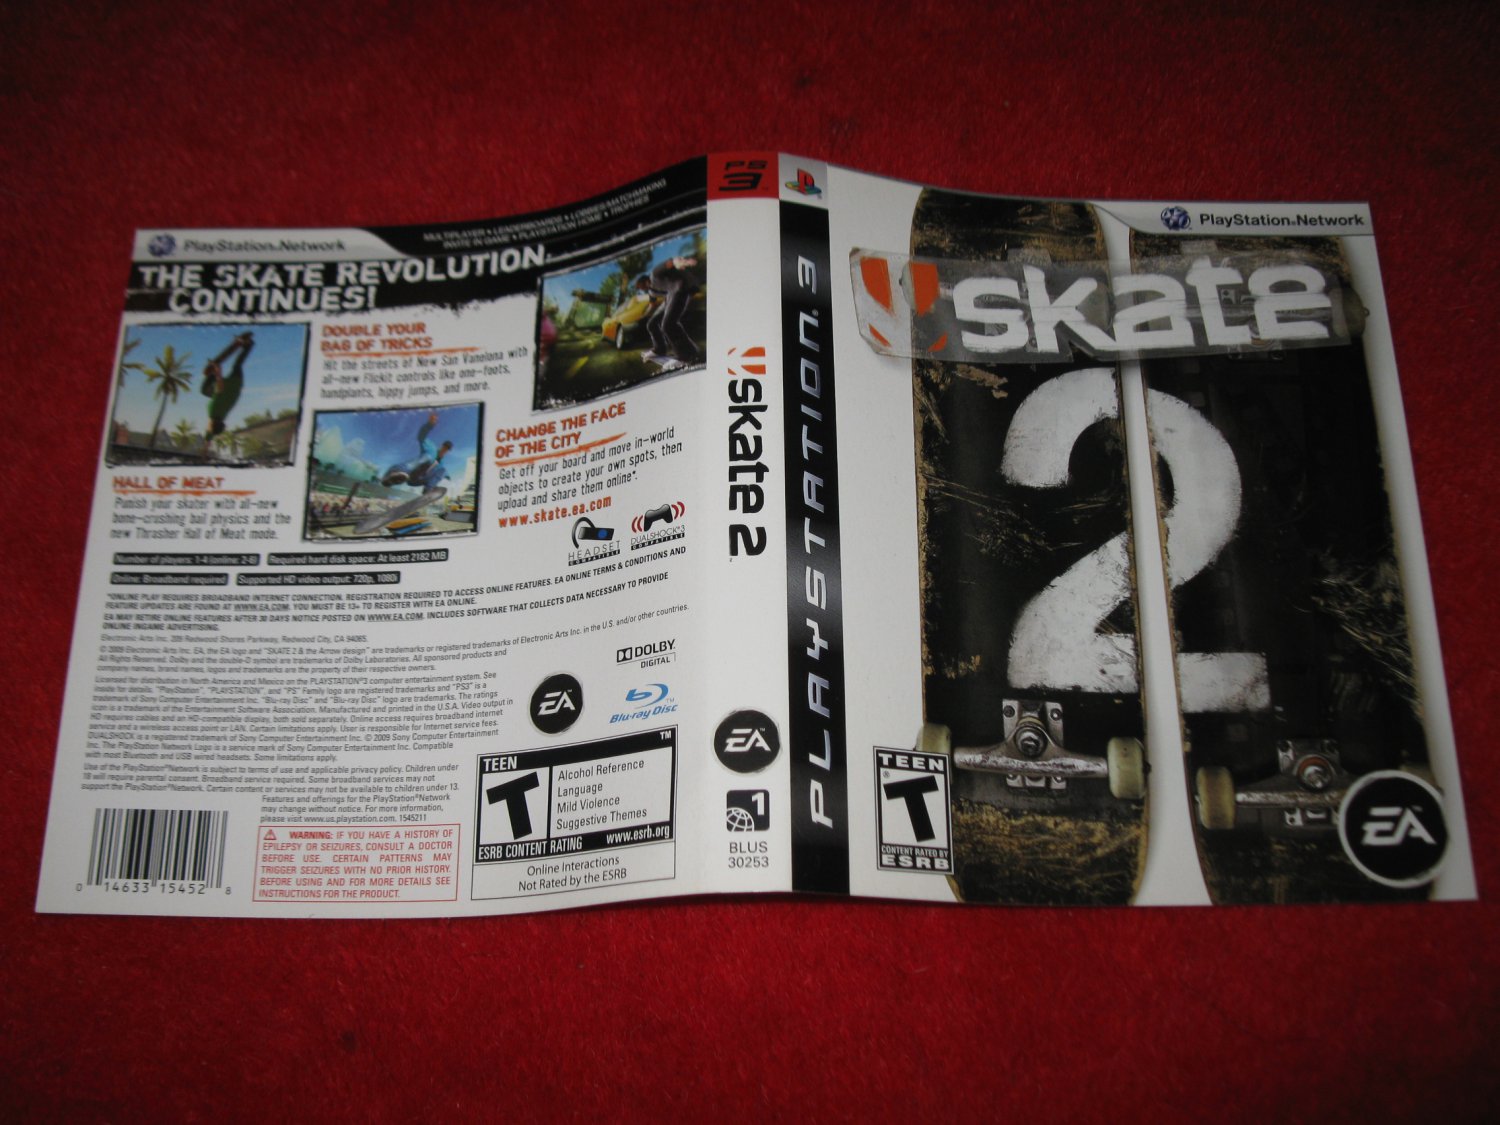 Skate 2 : Playstation 3 PS3 Video Game Case Cover Art insert